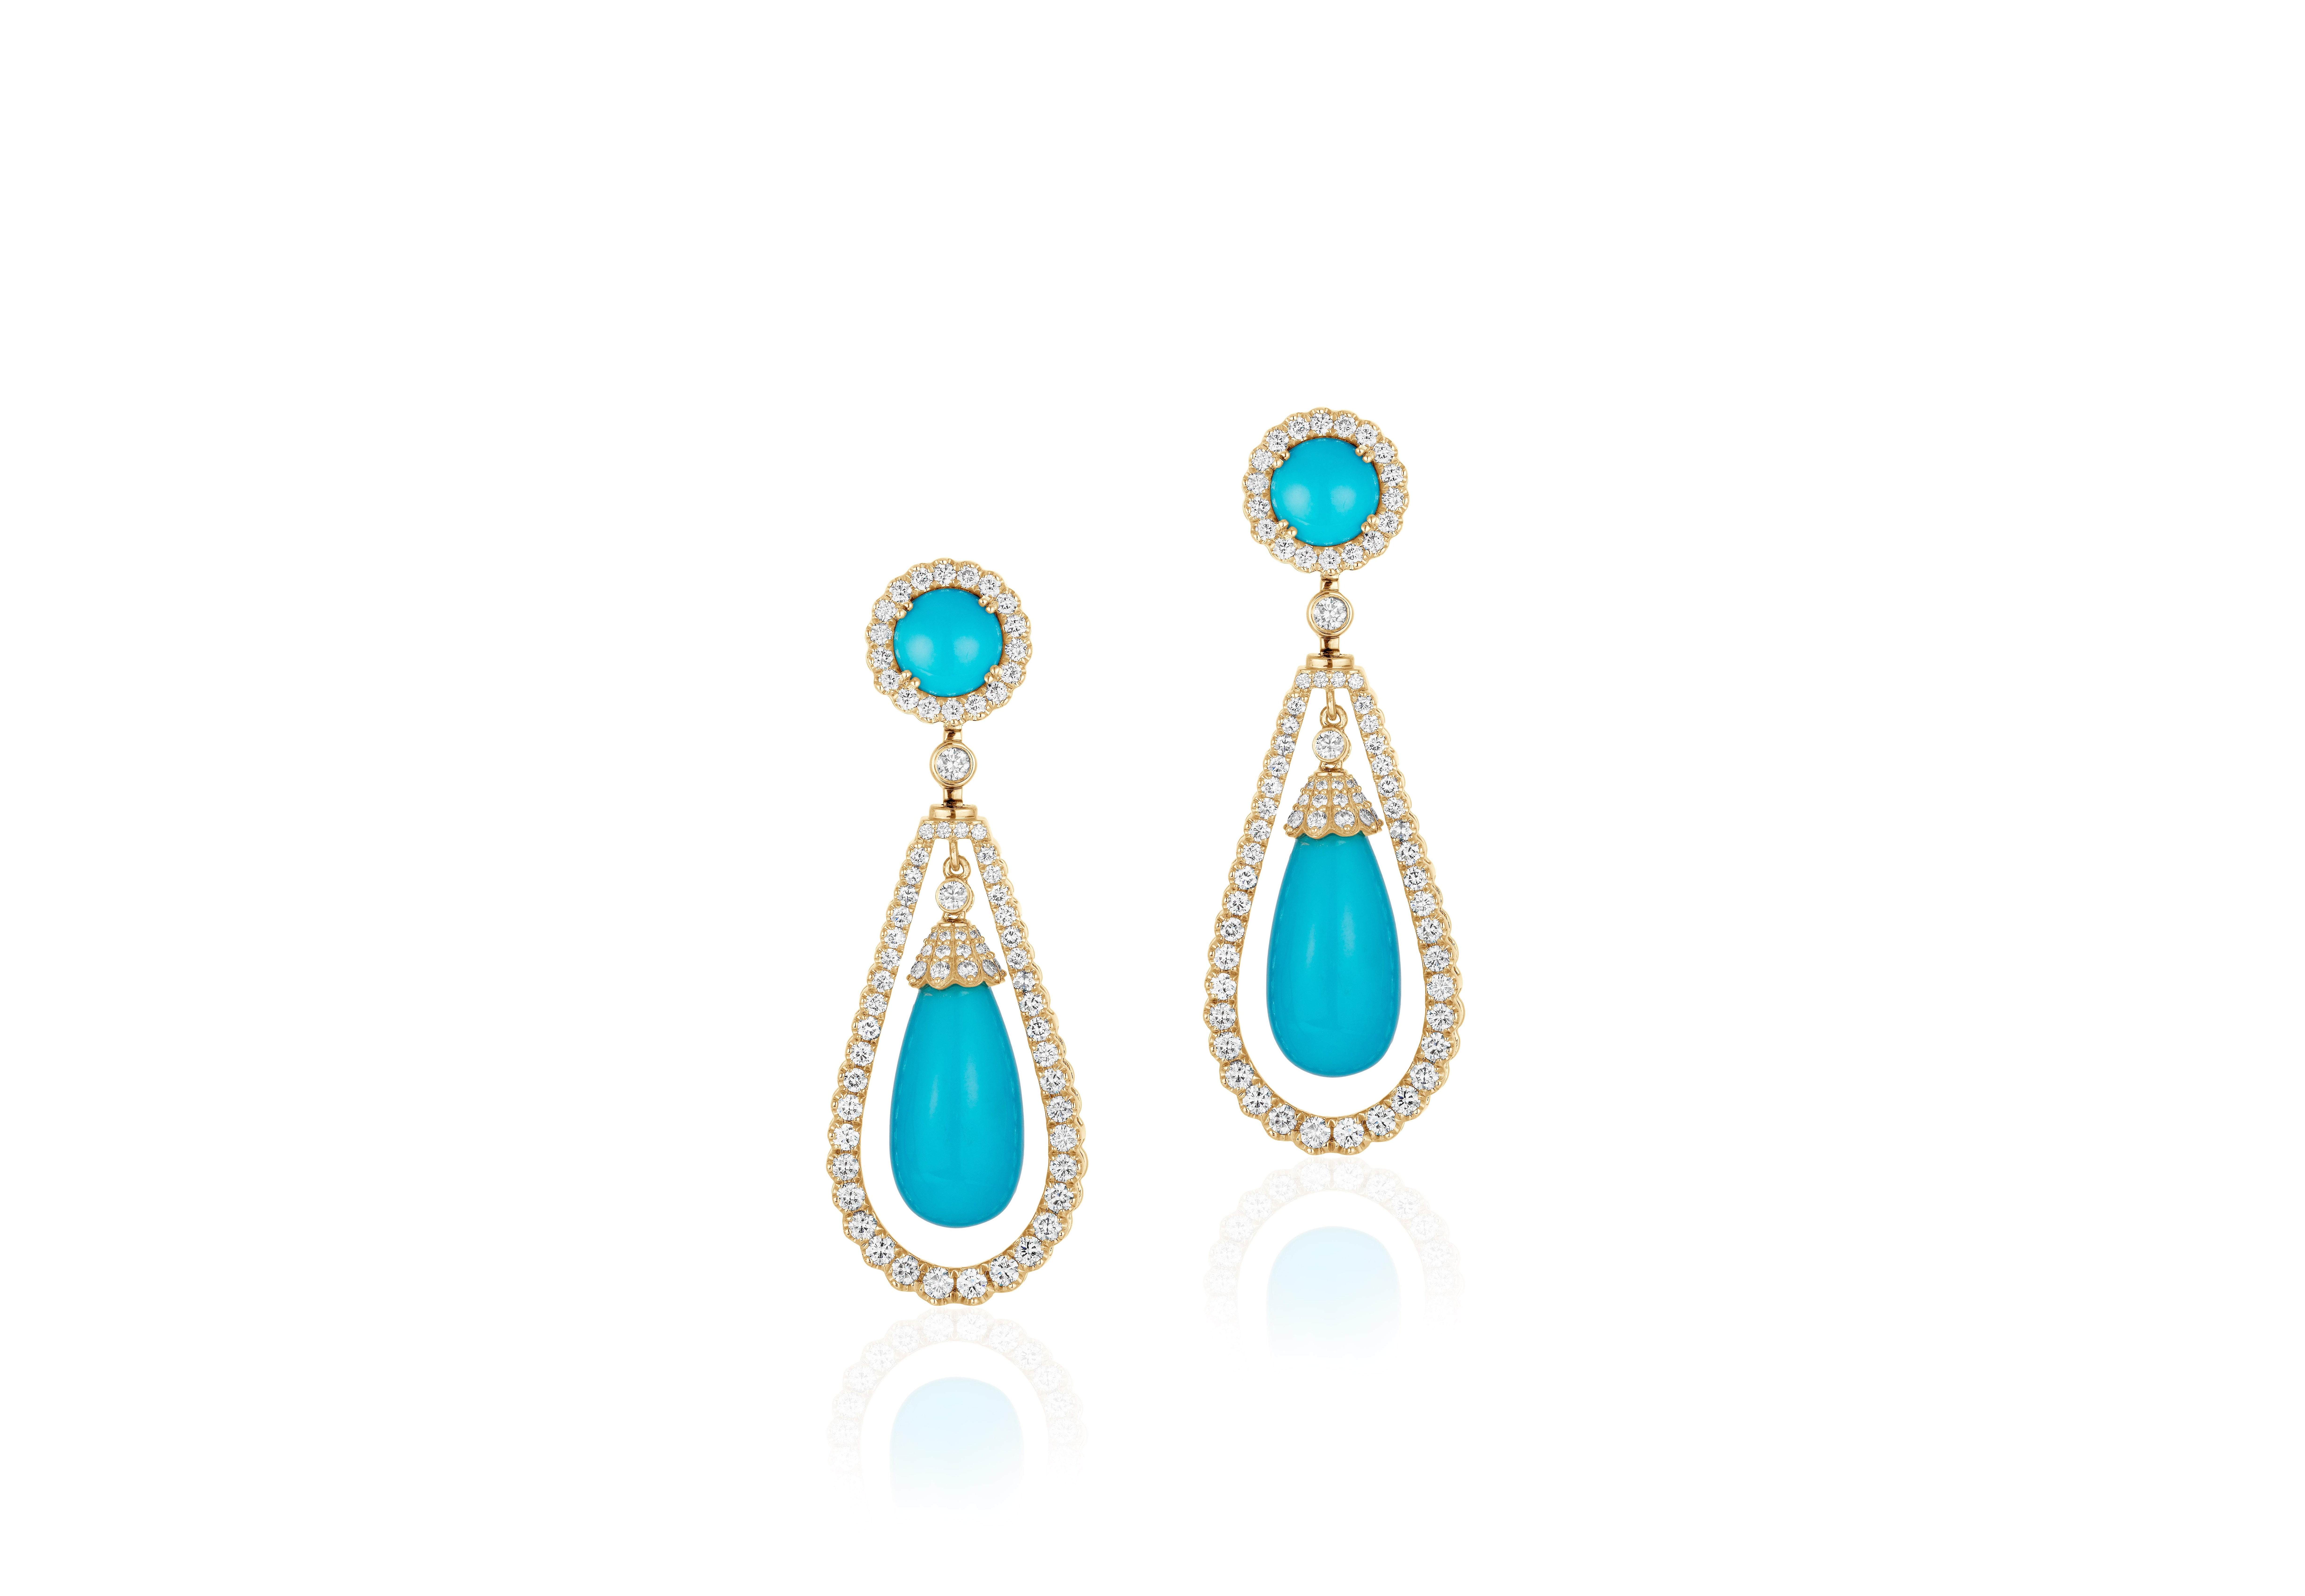 Turquoise Cabs and Turquoise Drop Earrings with Diamonds in 18K Yellow Gold 

Stone size: 9 mm

Gemstone Weight:  Turquoise- 11.68 Carats. 

Diamond: G-H / VS, Approx Wt: 3.55 Carats